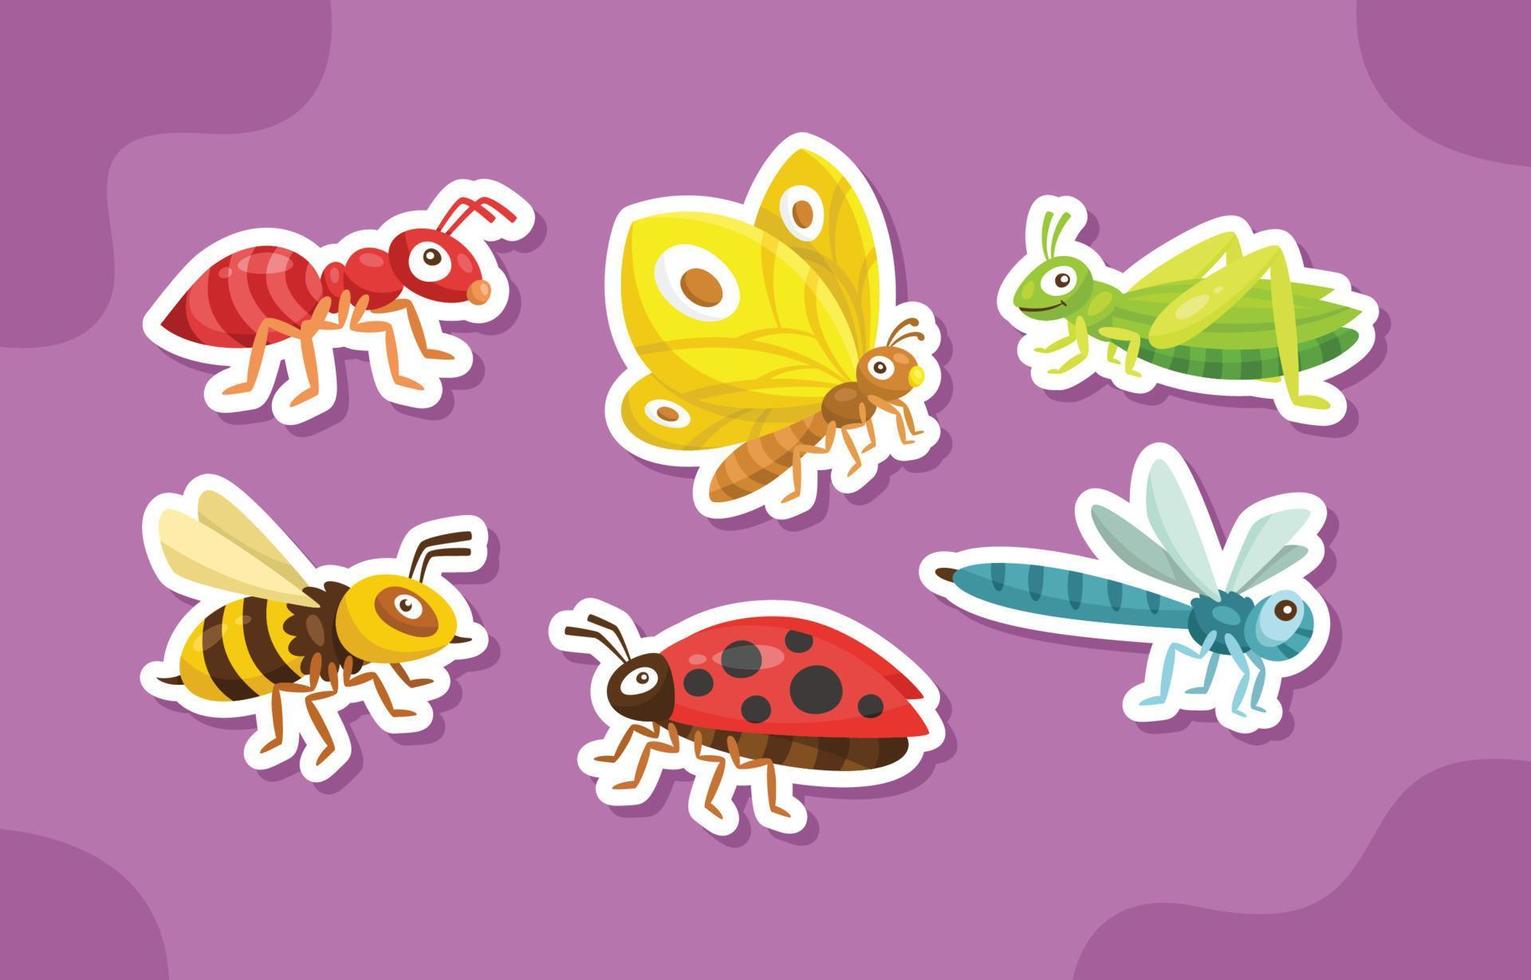 Cute Insects Sticker Collection vector